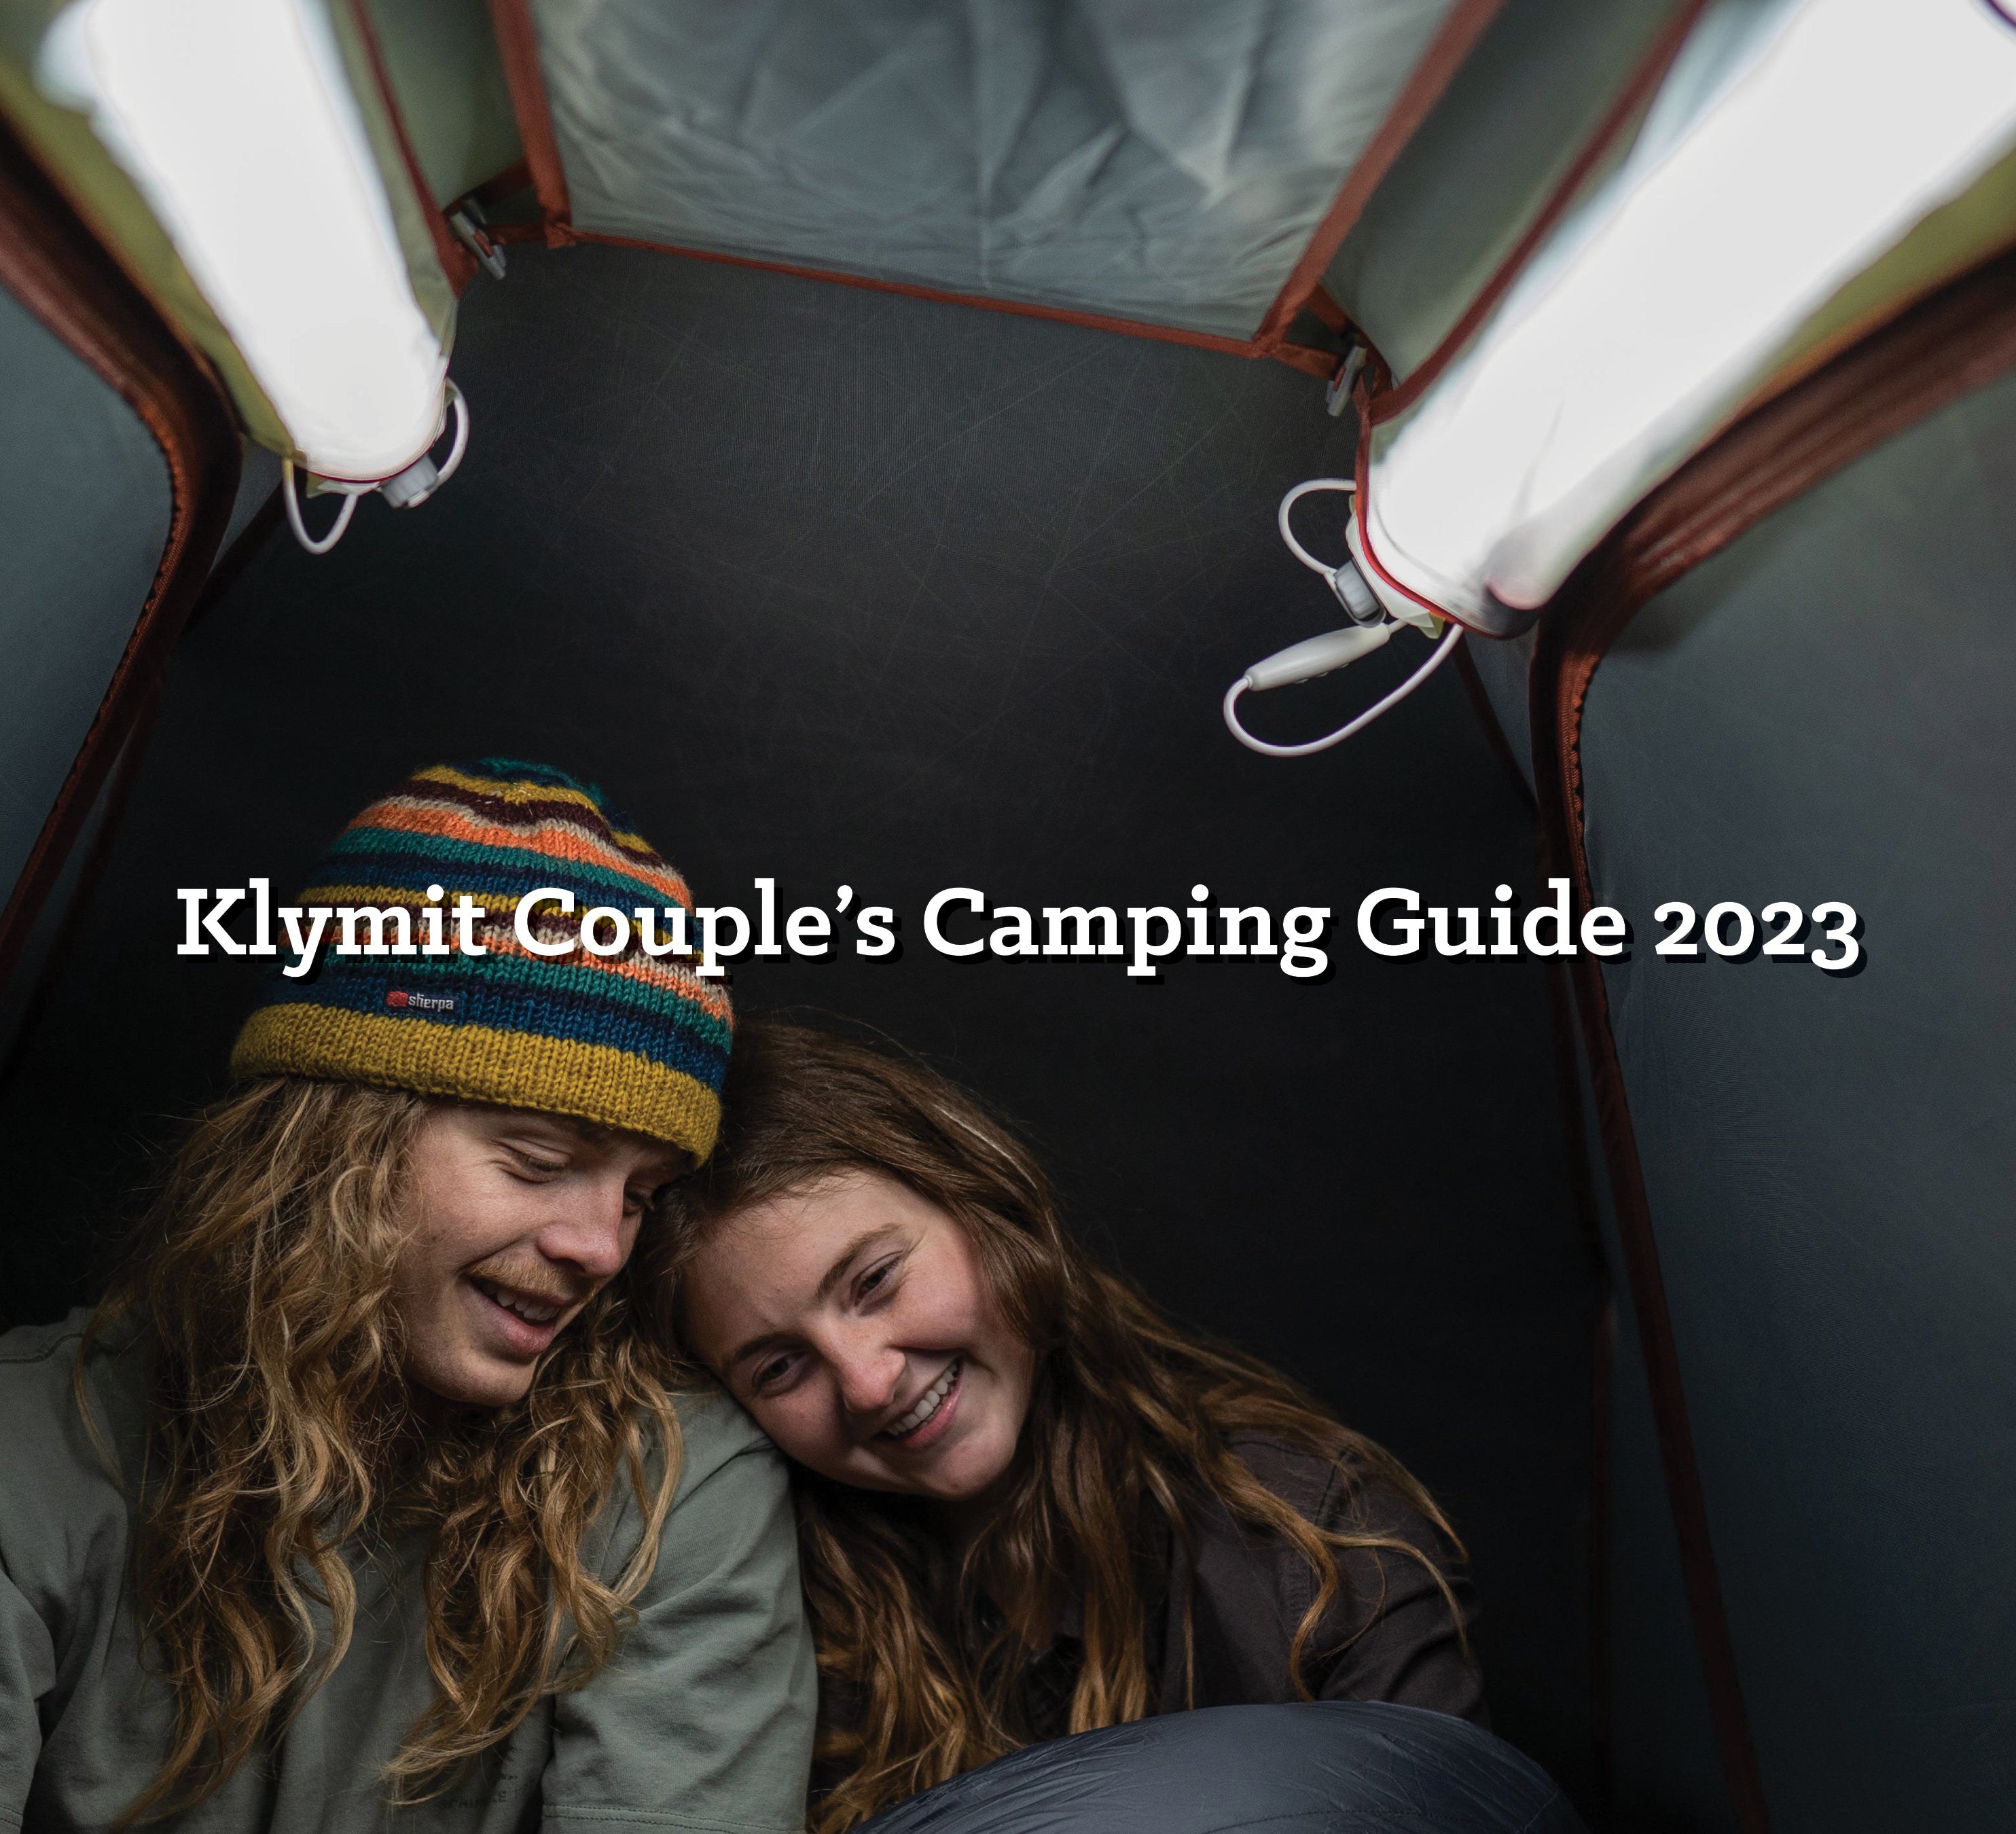 Klymit Couple's Camping Guide 2023